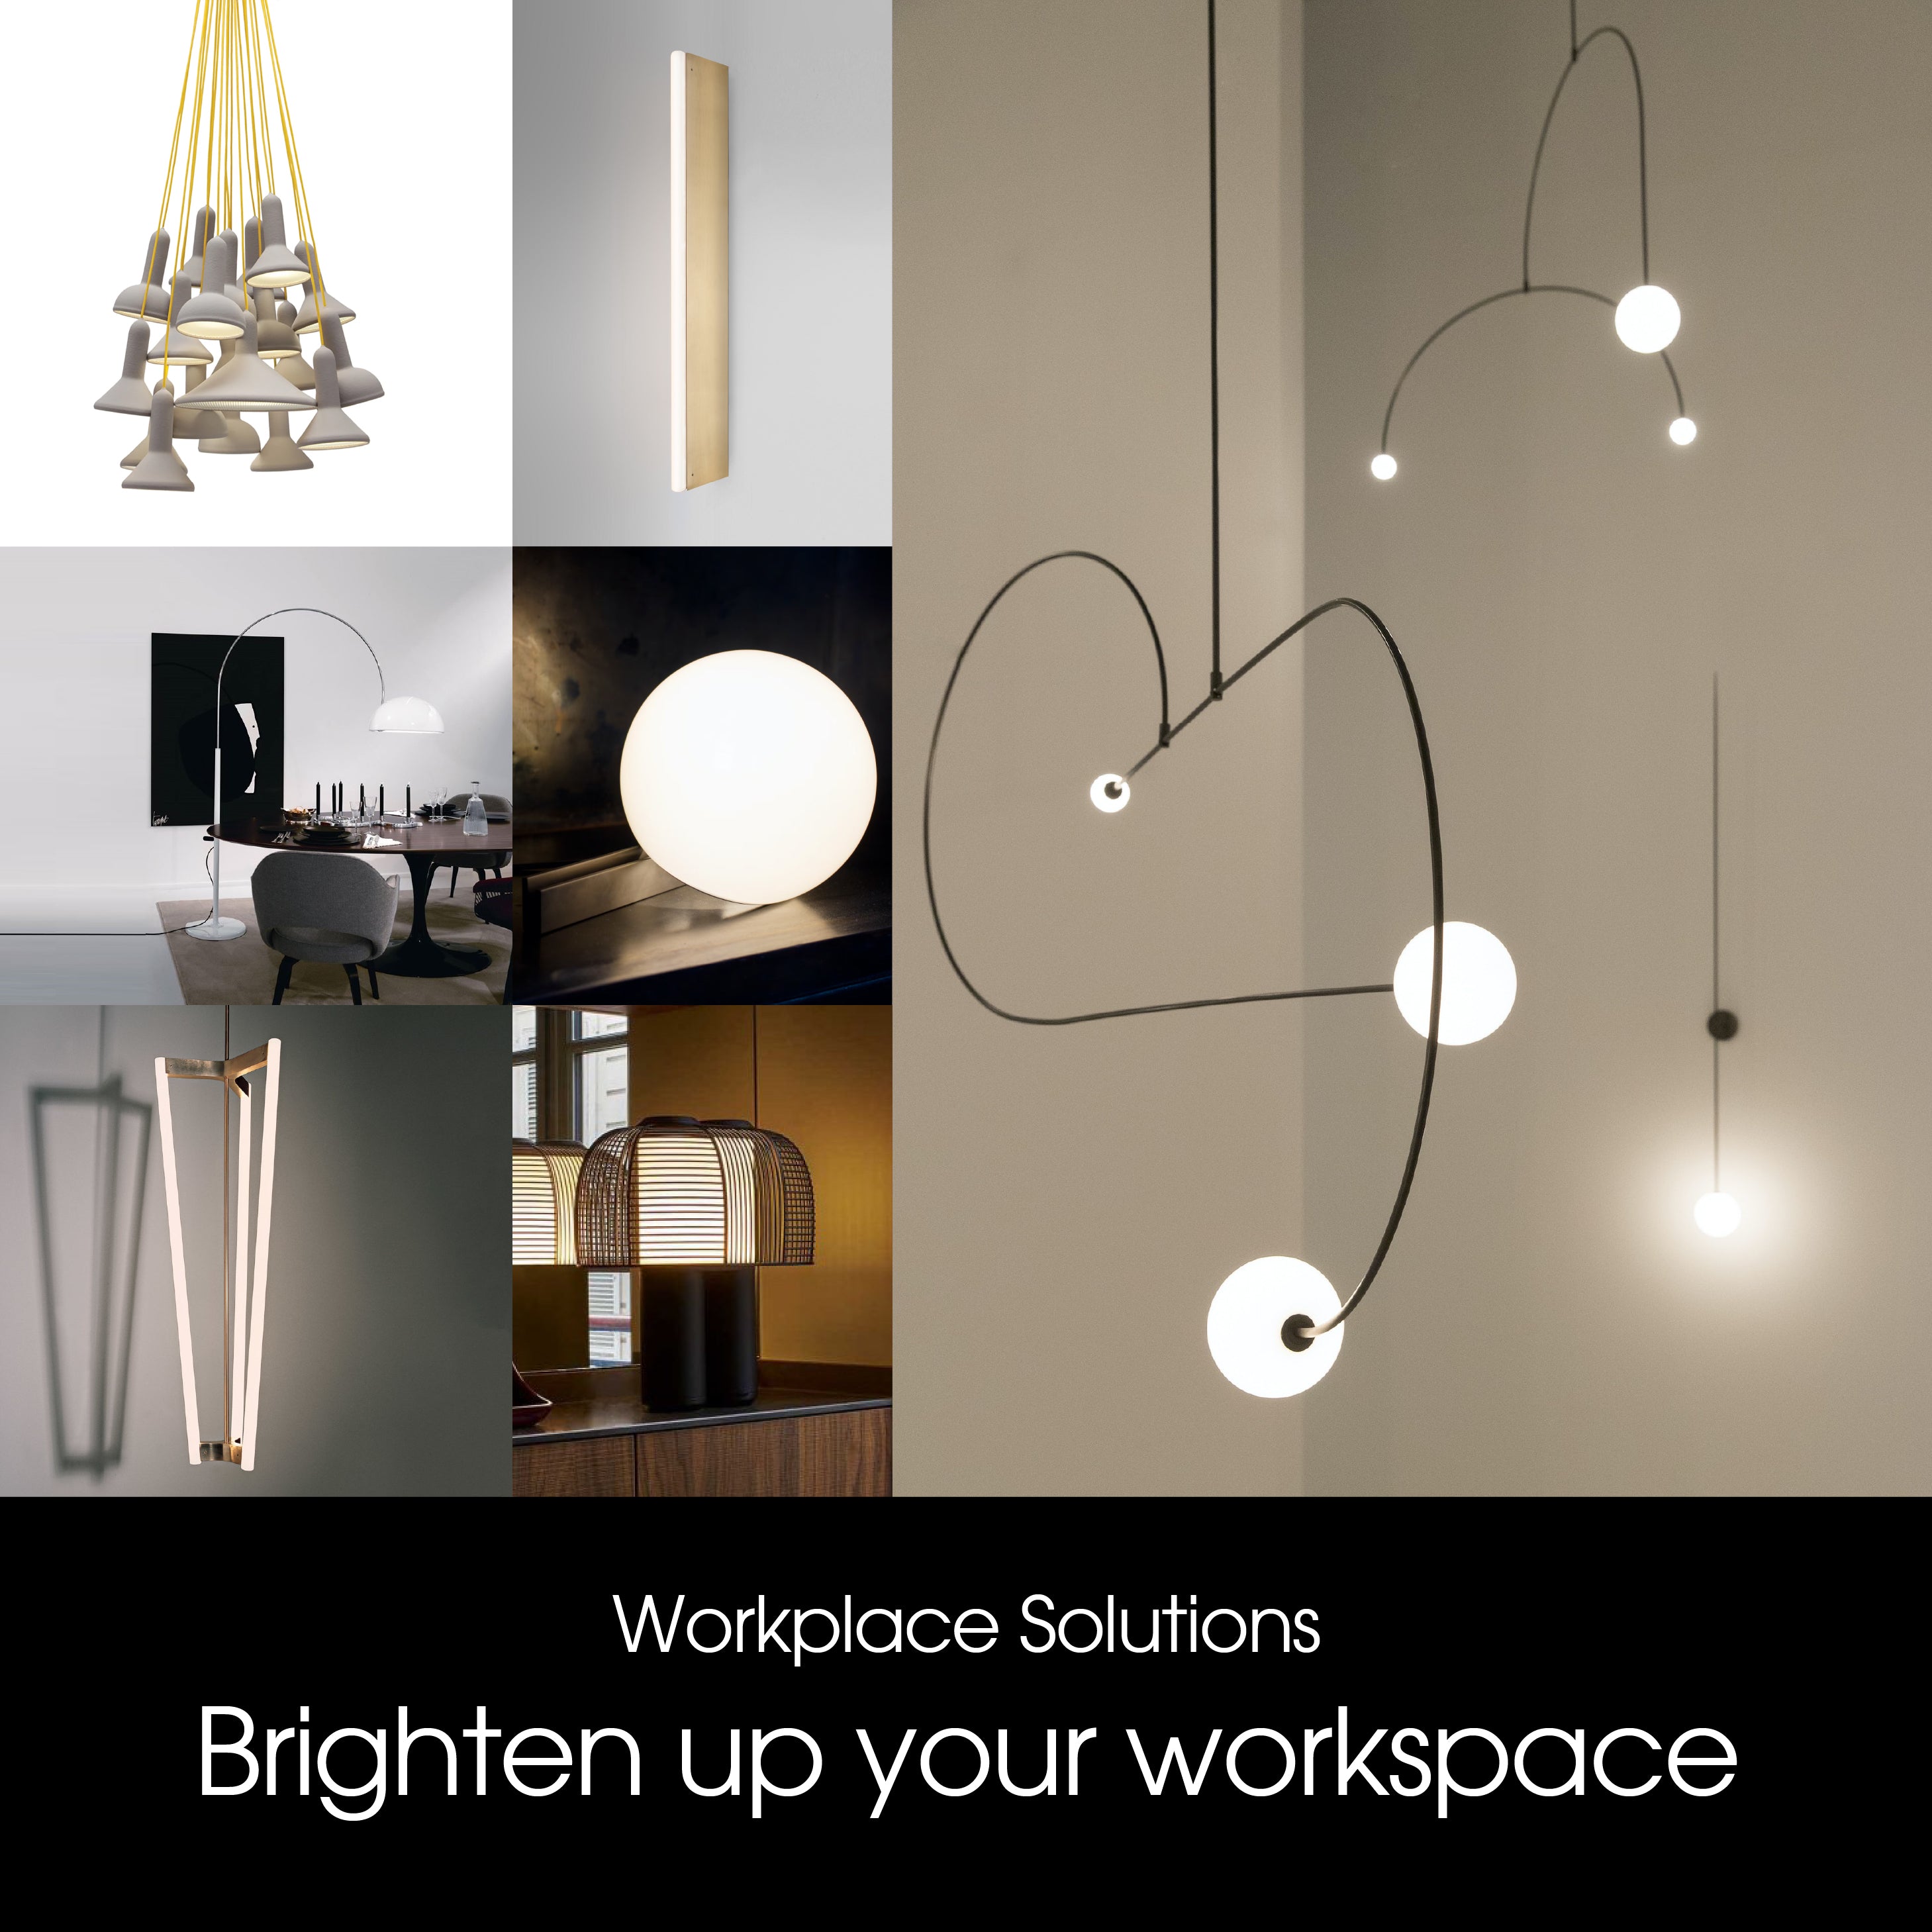 WORKPLACE SOLUTIONS | BRIGHTEN UP YOUR WORKPLACE